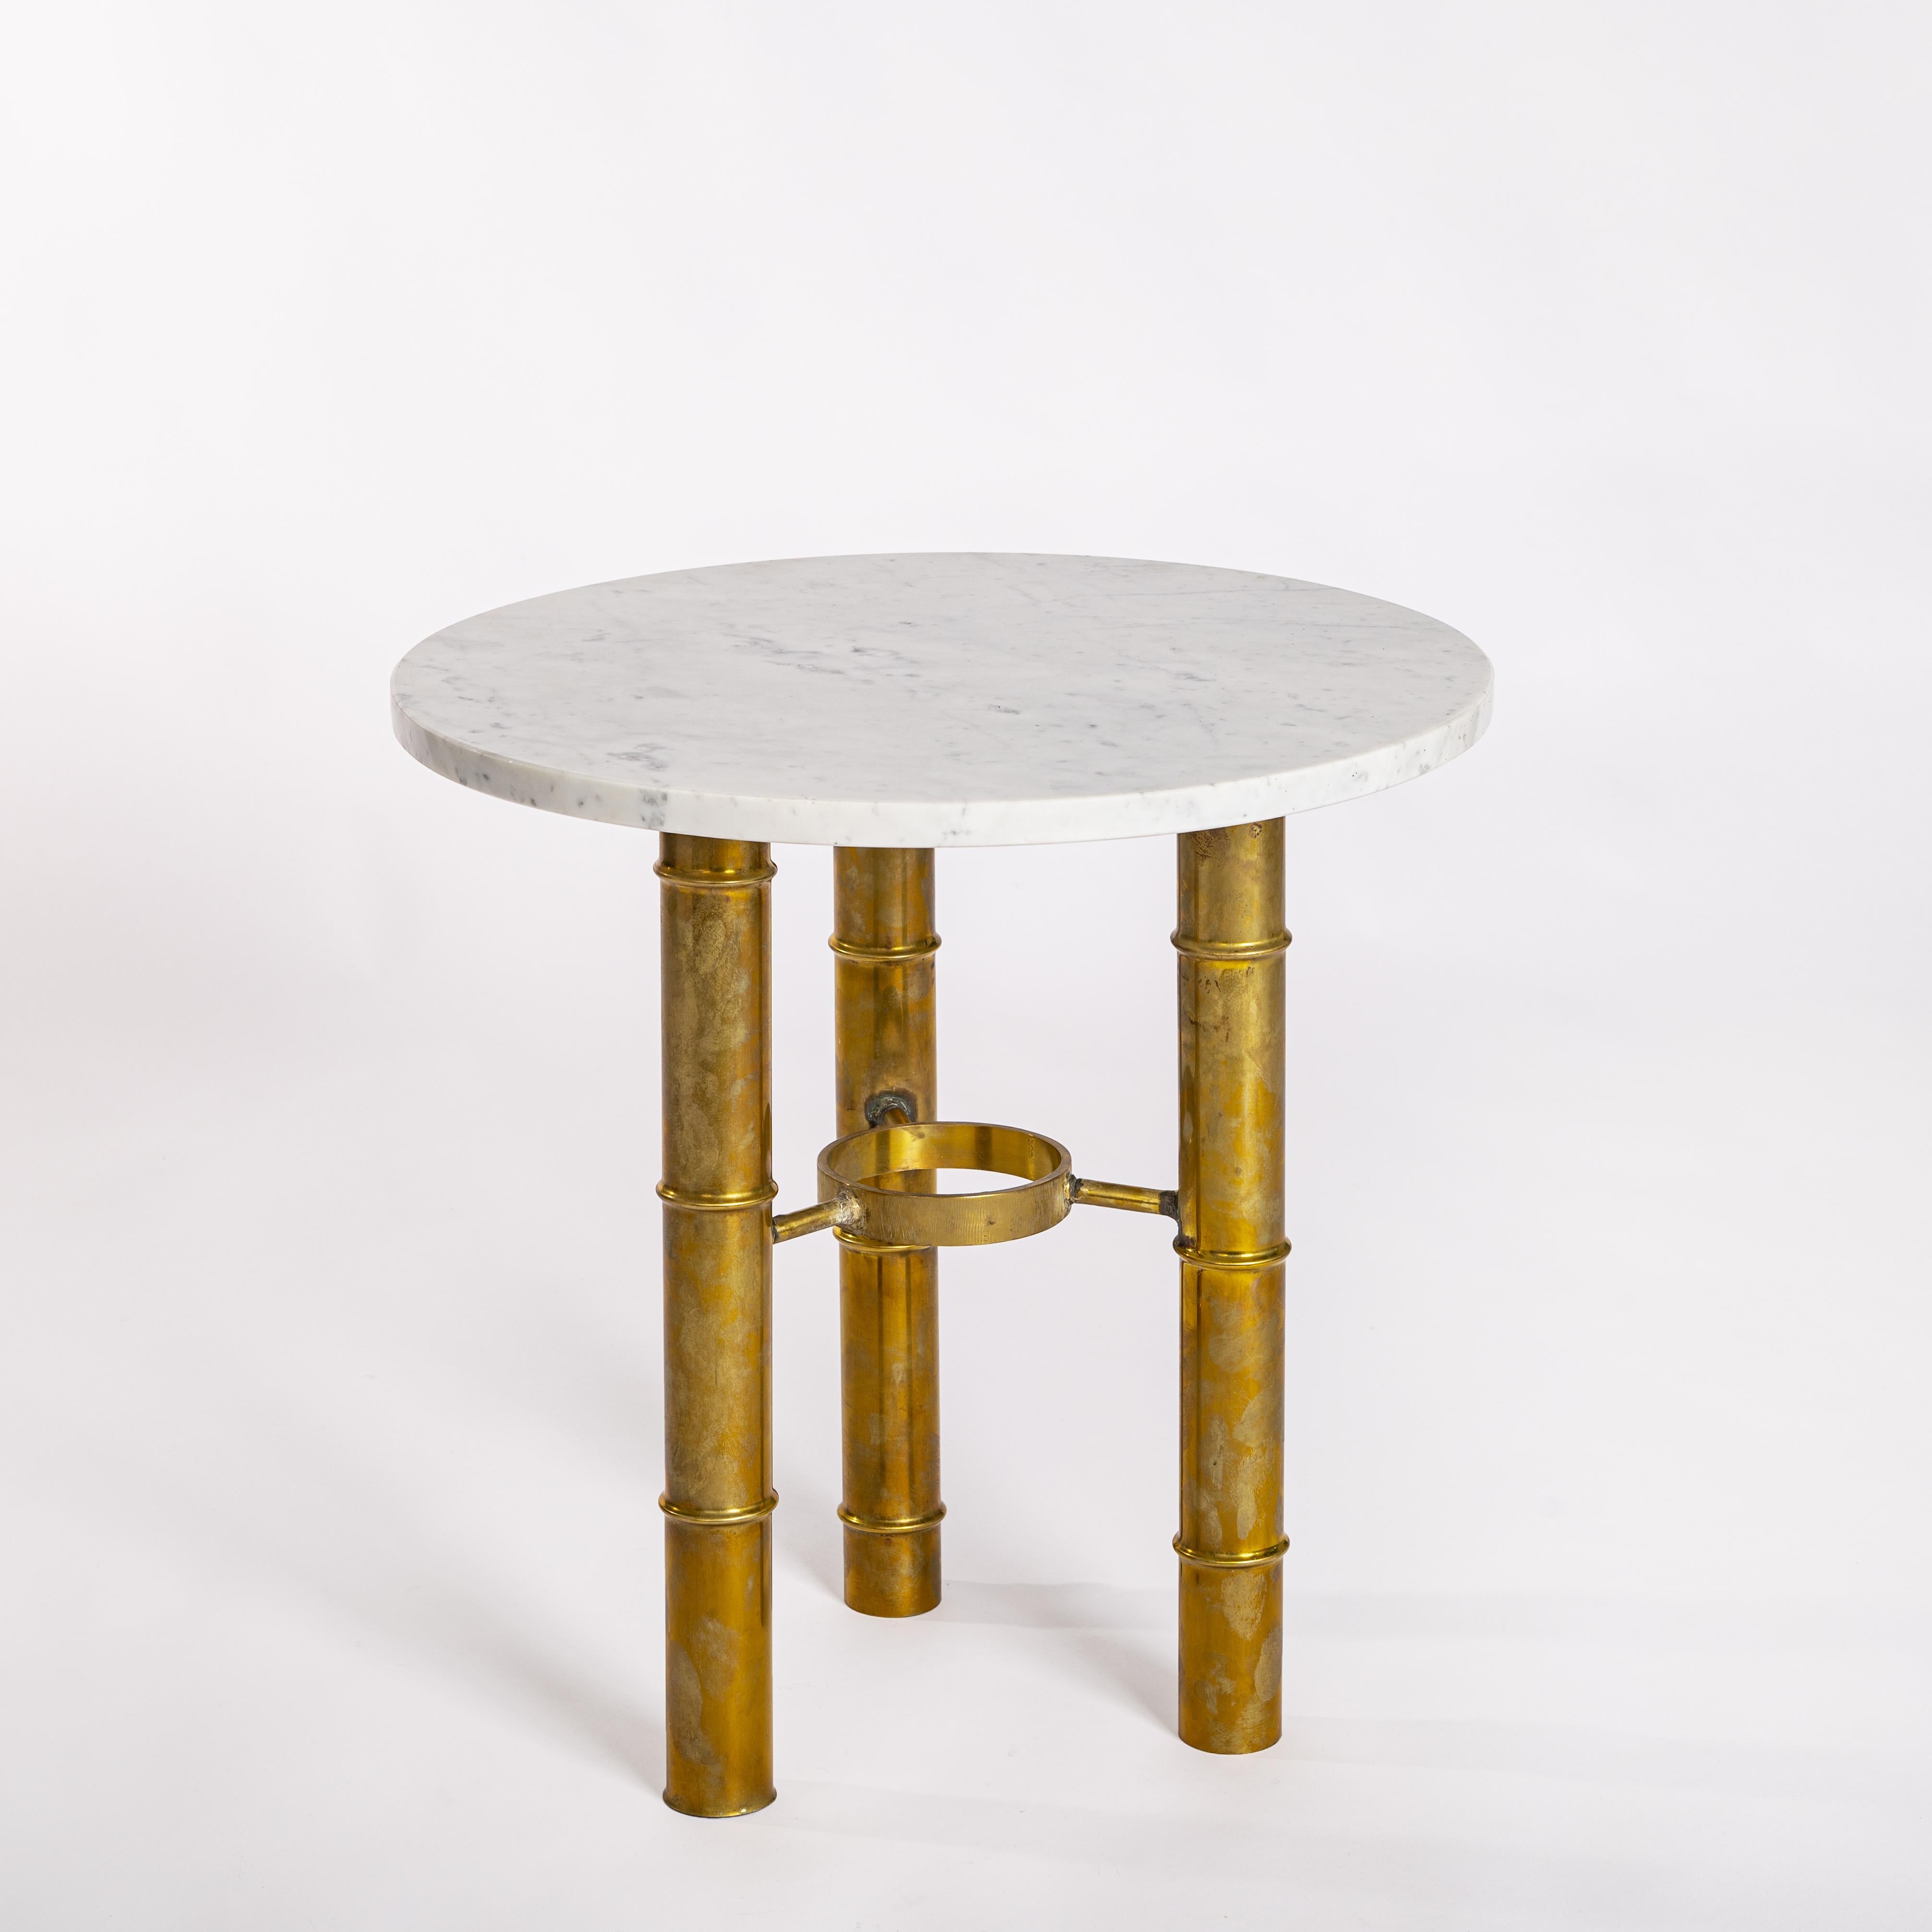 Hollywood Regency Pair of French Mid-Century Side Tables Brass Bamboo Design White Marble Top 70s For Sale